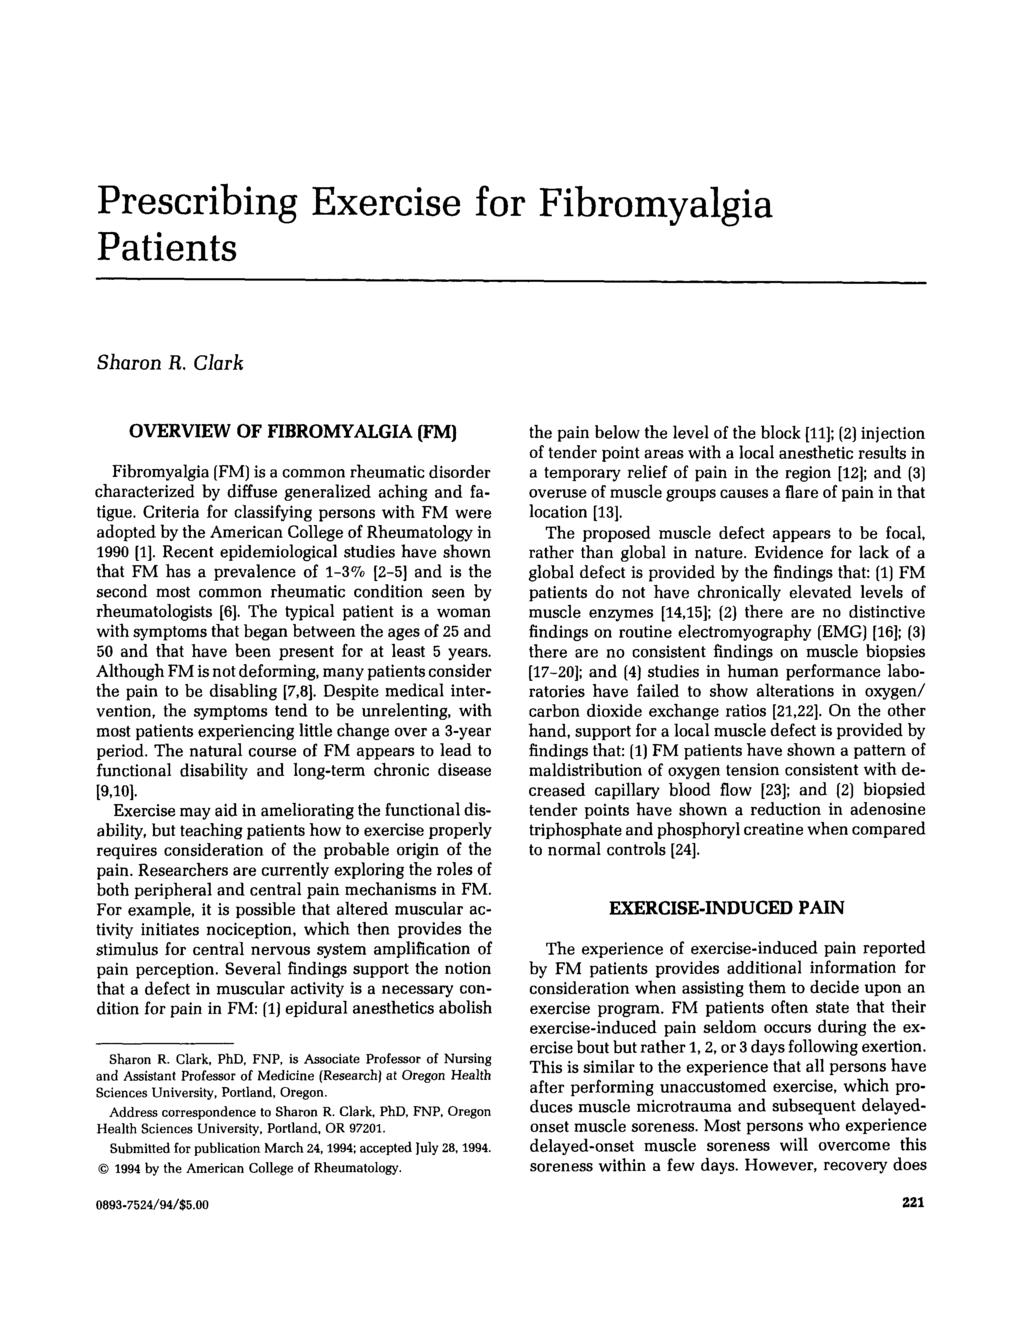 Prescribing Exercise for Fibromyalgia Patients Sharon R. Clark OVERVIEW OF FIBROMYALGIA (FM) Fibromyalgia (FM) is a common rheumatic disorder characterized by diffuse generalized aching and fatigue.